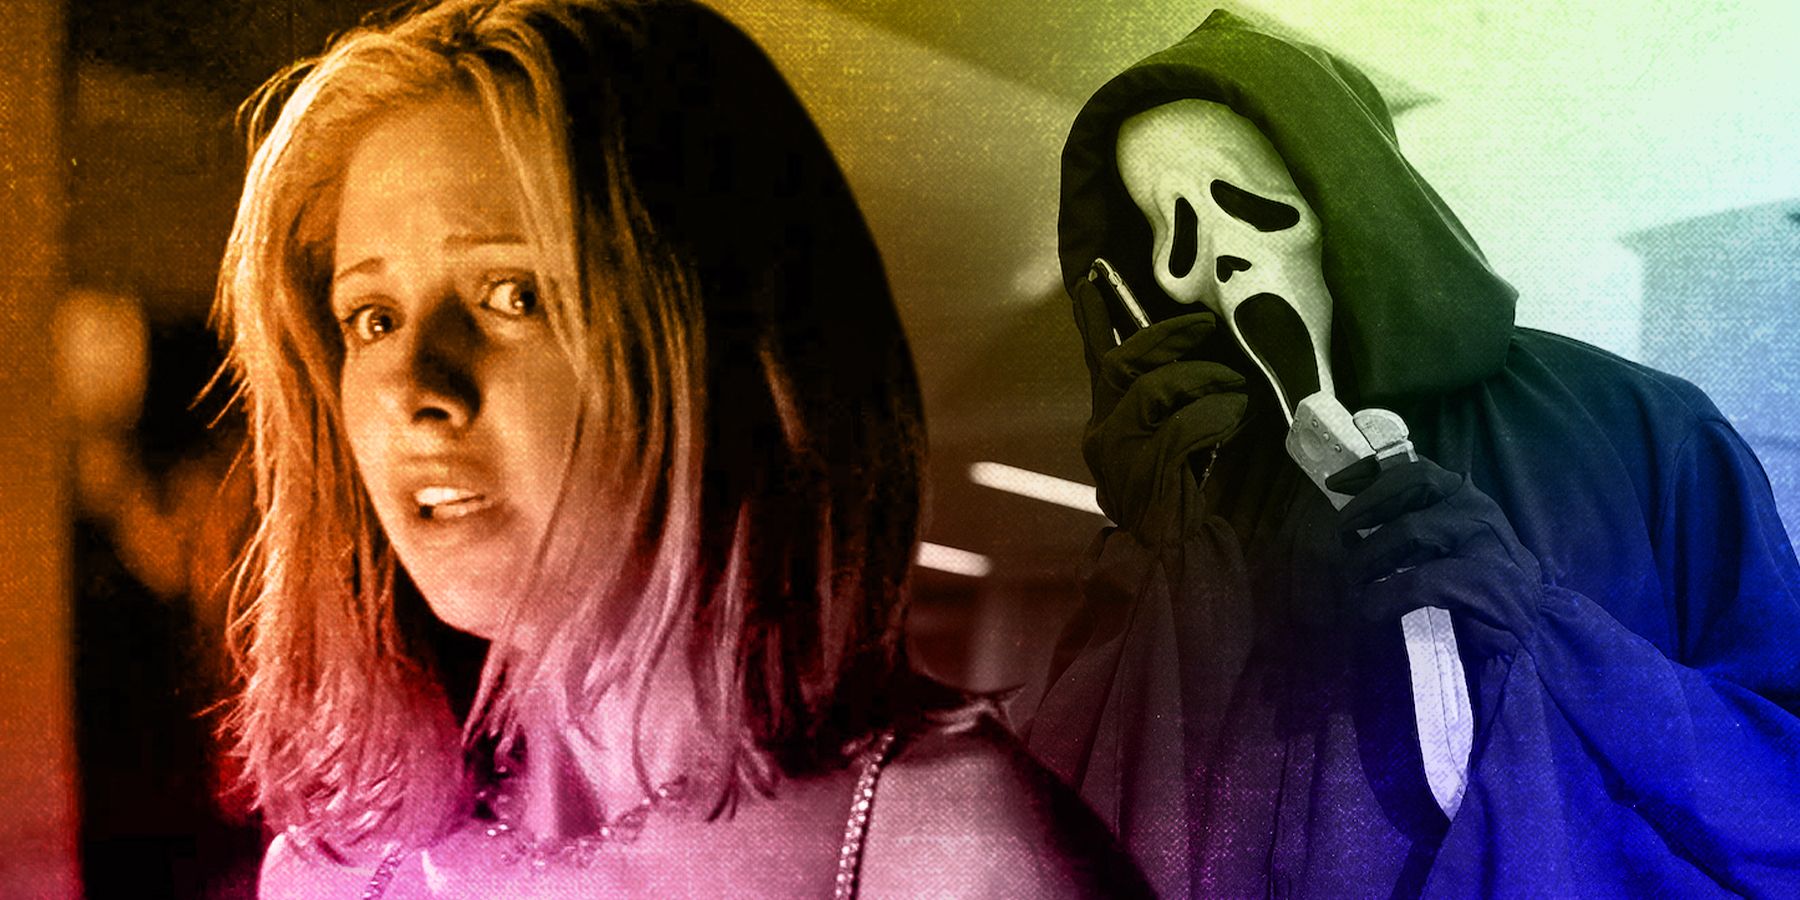 Ghostface from Scream stalks a character from I Know What You Did Last Summer 